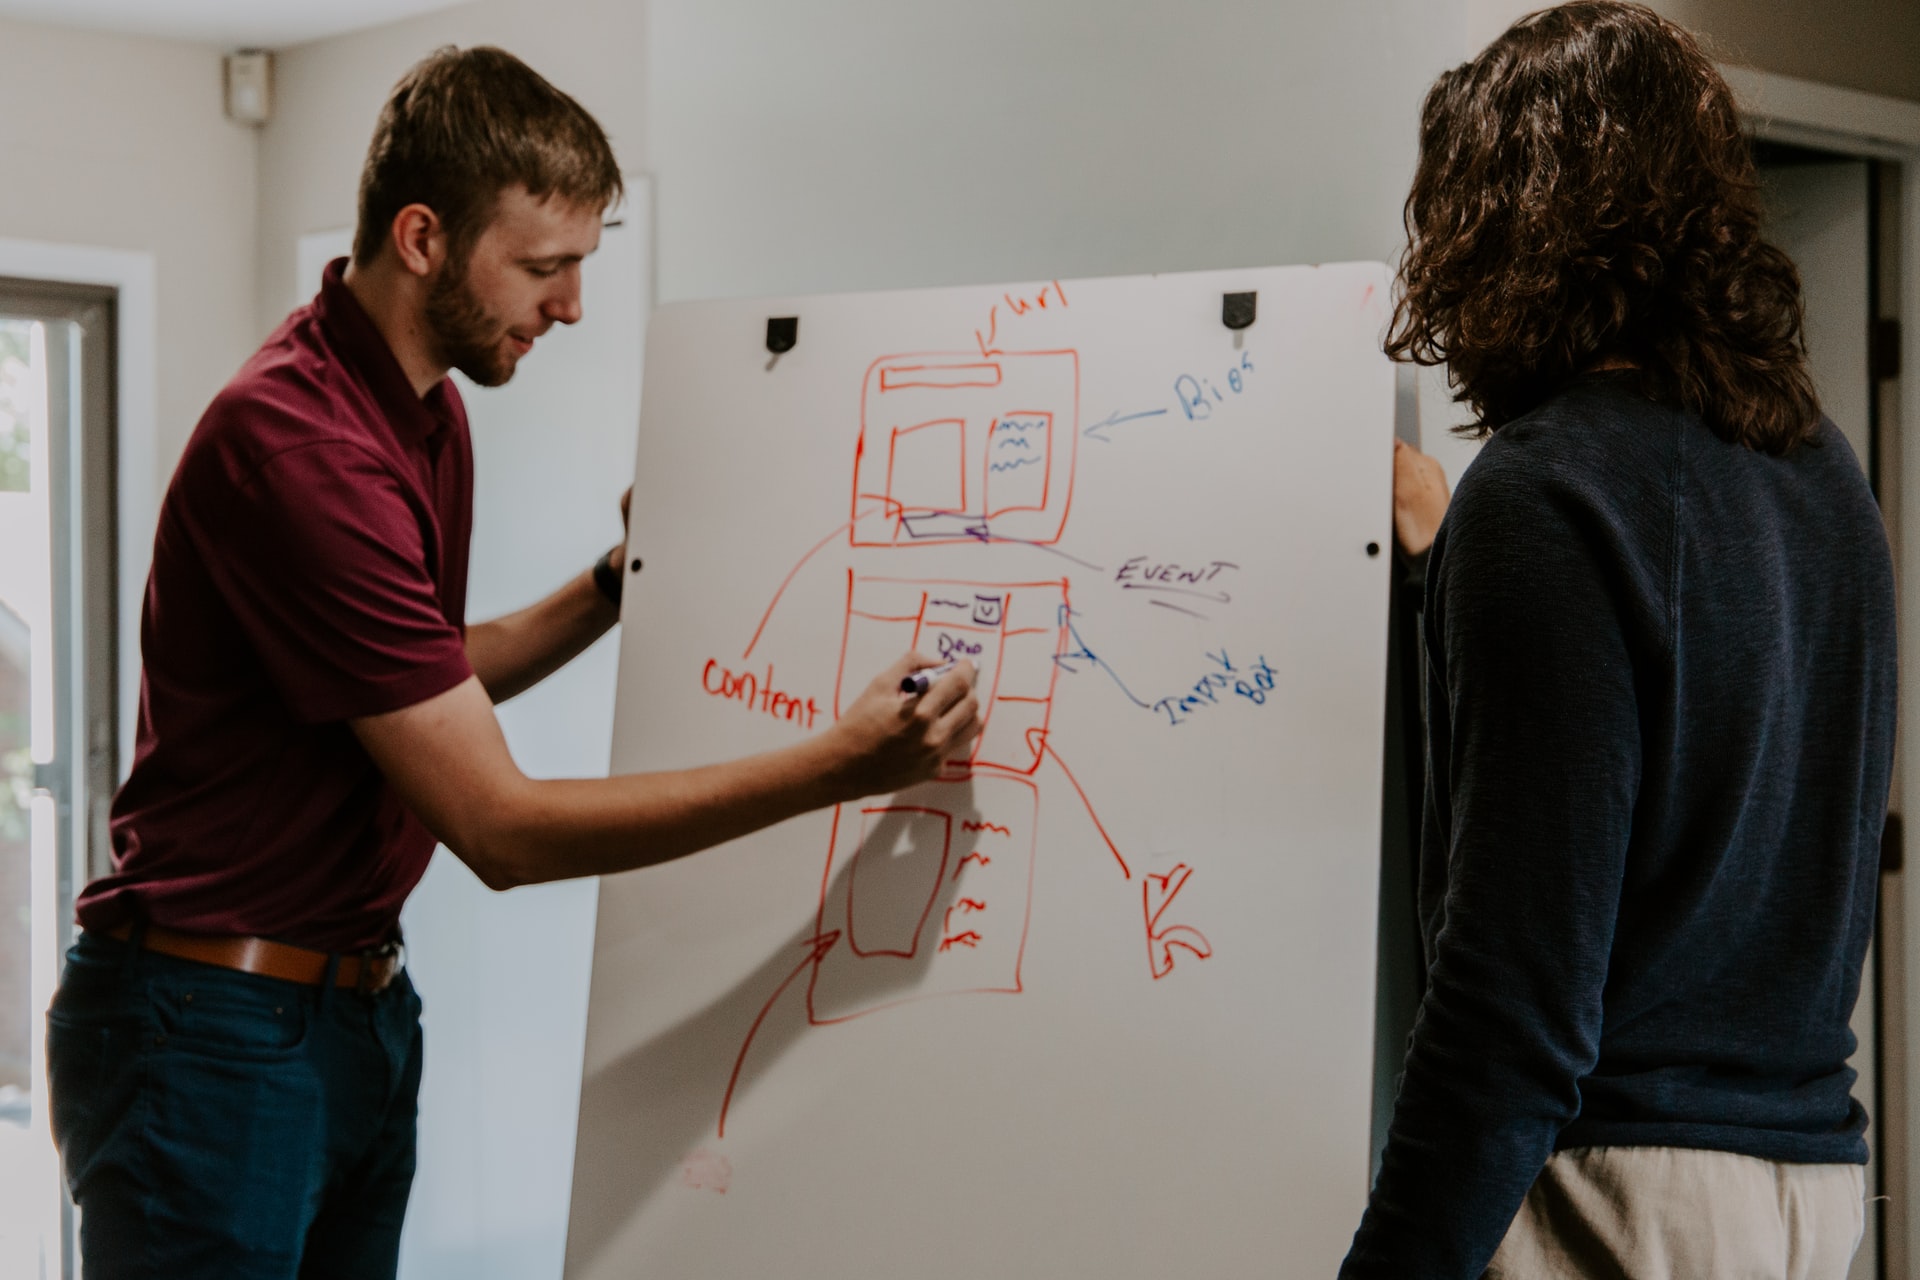 Two person developing an application design while one of them is drawing on a whiteboard